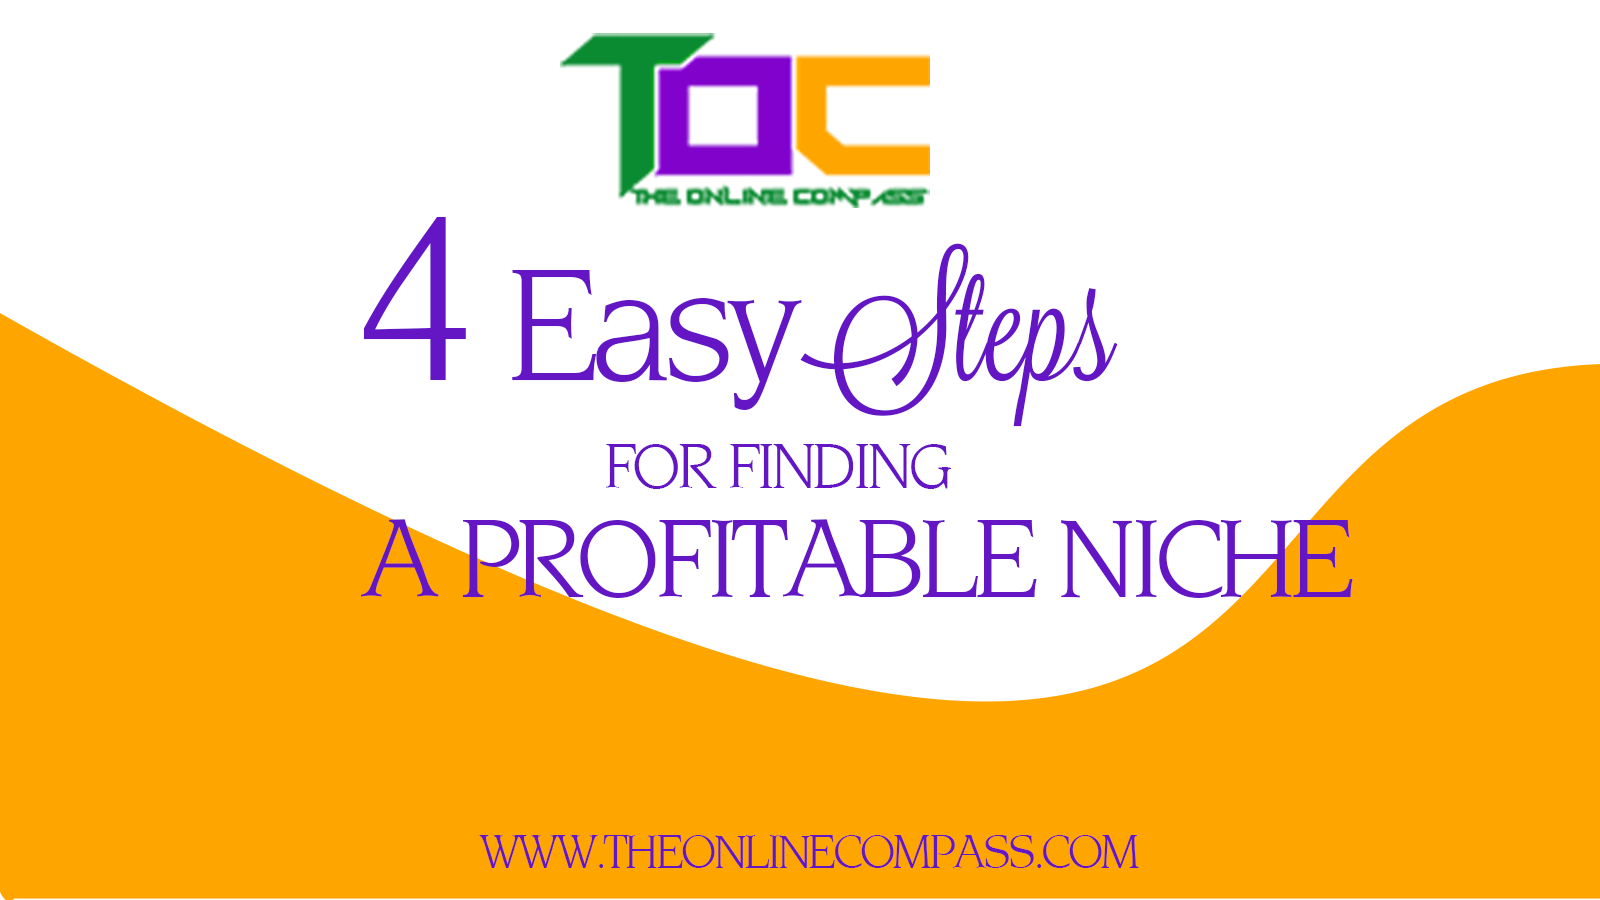 How to define and find a profitable niche market